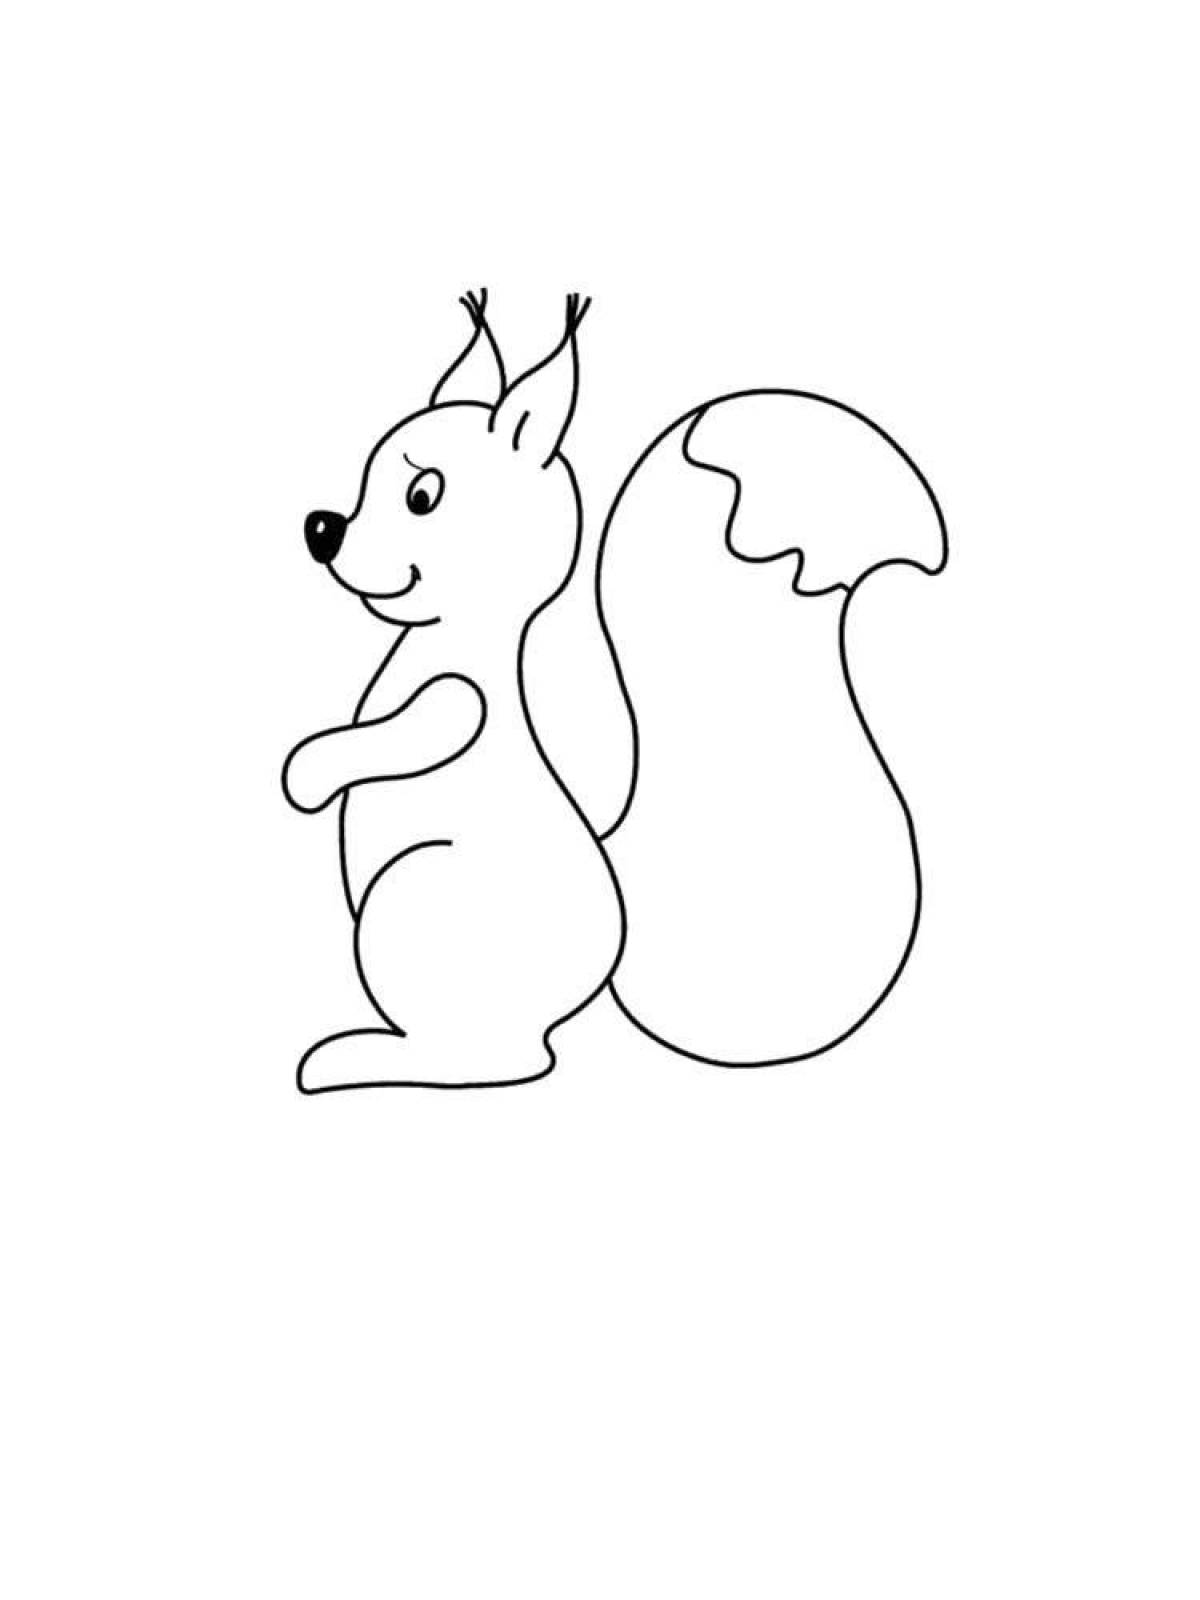 Fun squirrel coloring for kids